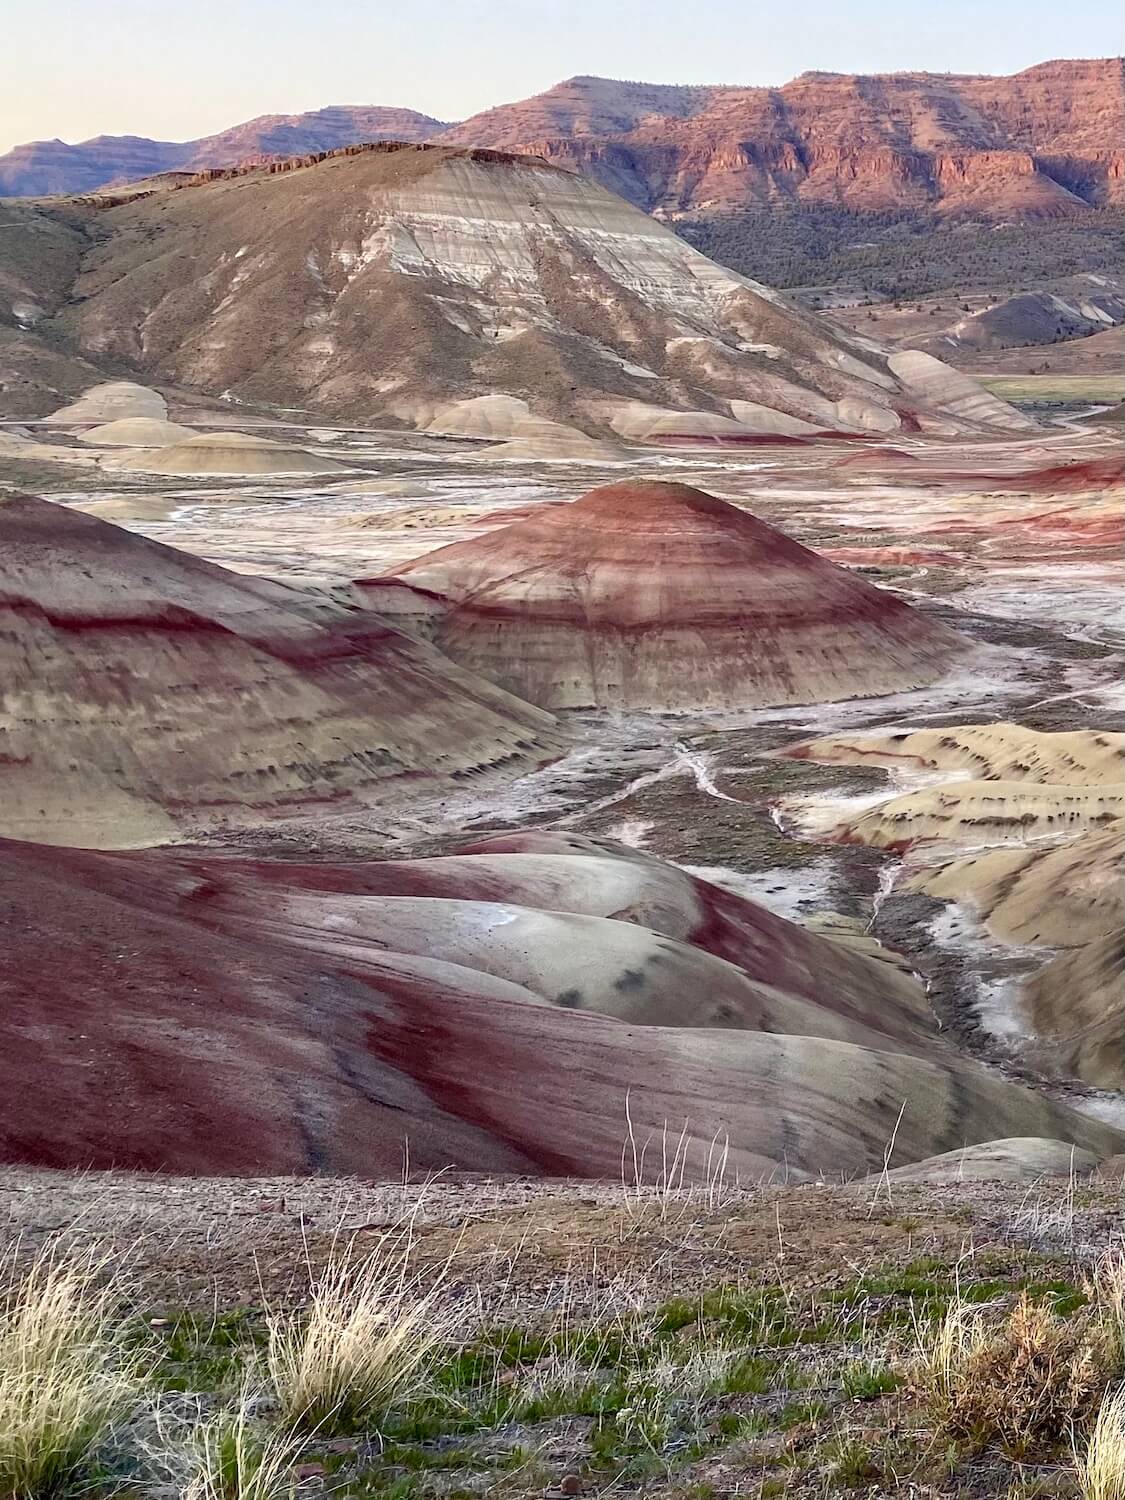 An iconic shot of the Painted Hills Oregon near sunset shows brilliant mounds of red volcanic material atop other layers of yellow and black.  The floor of this range appears to be a chalky white, while the sun still shines on a high canyon ridge in the distance. 